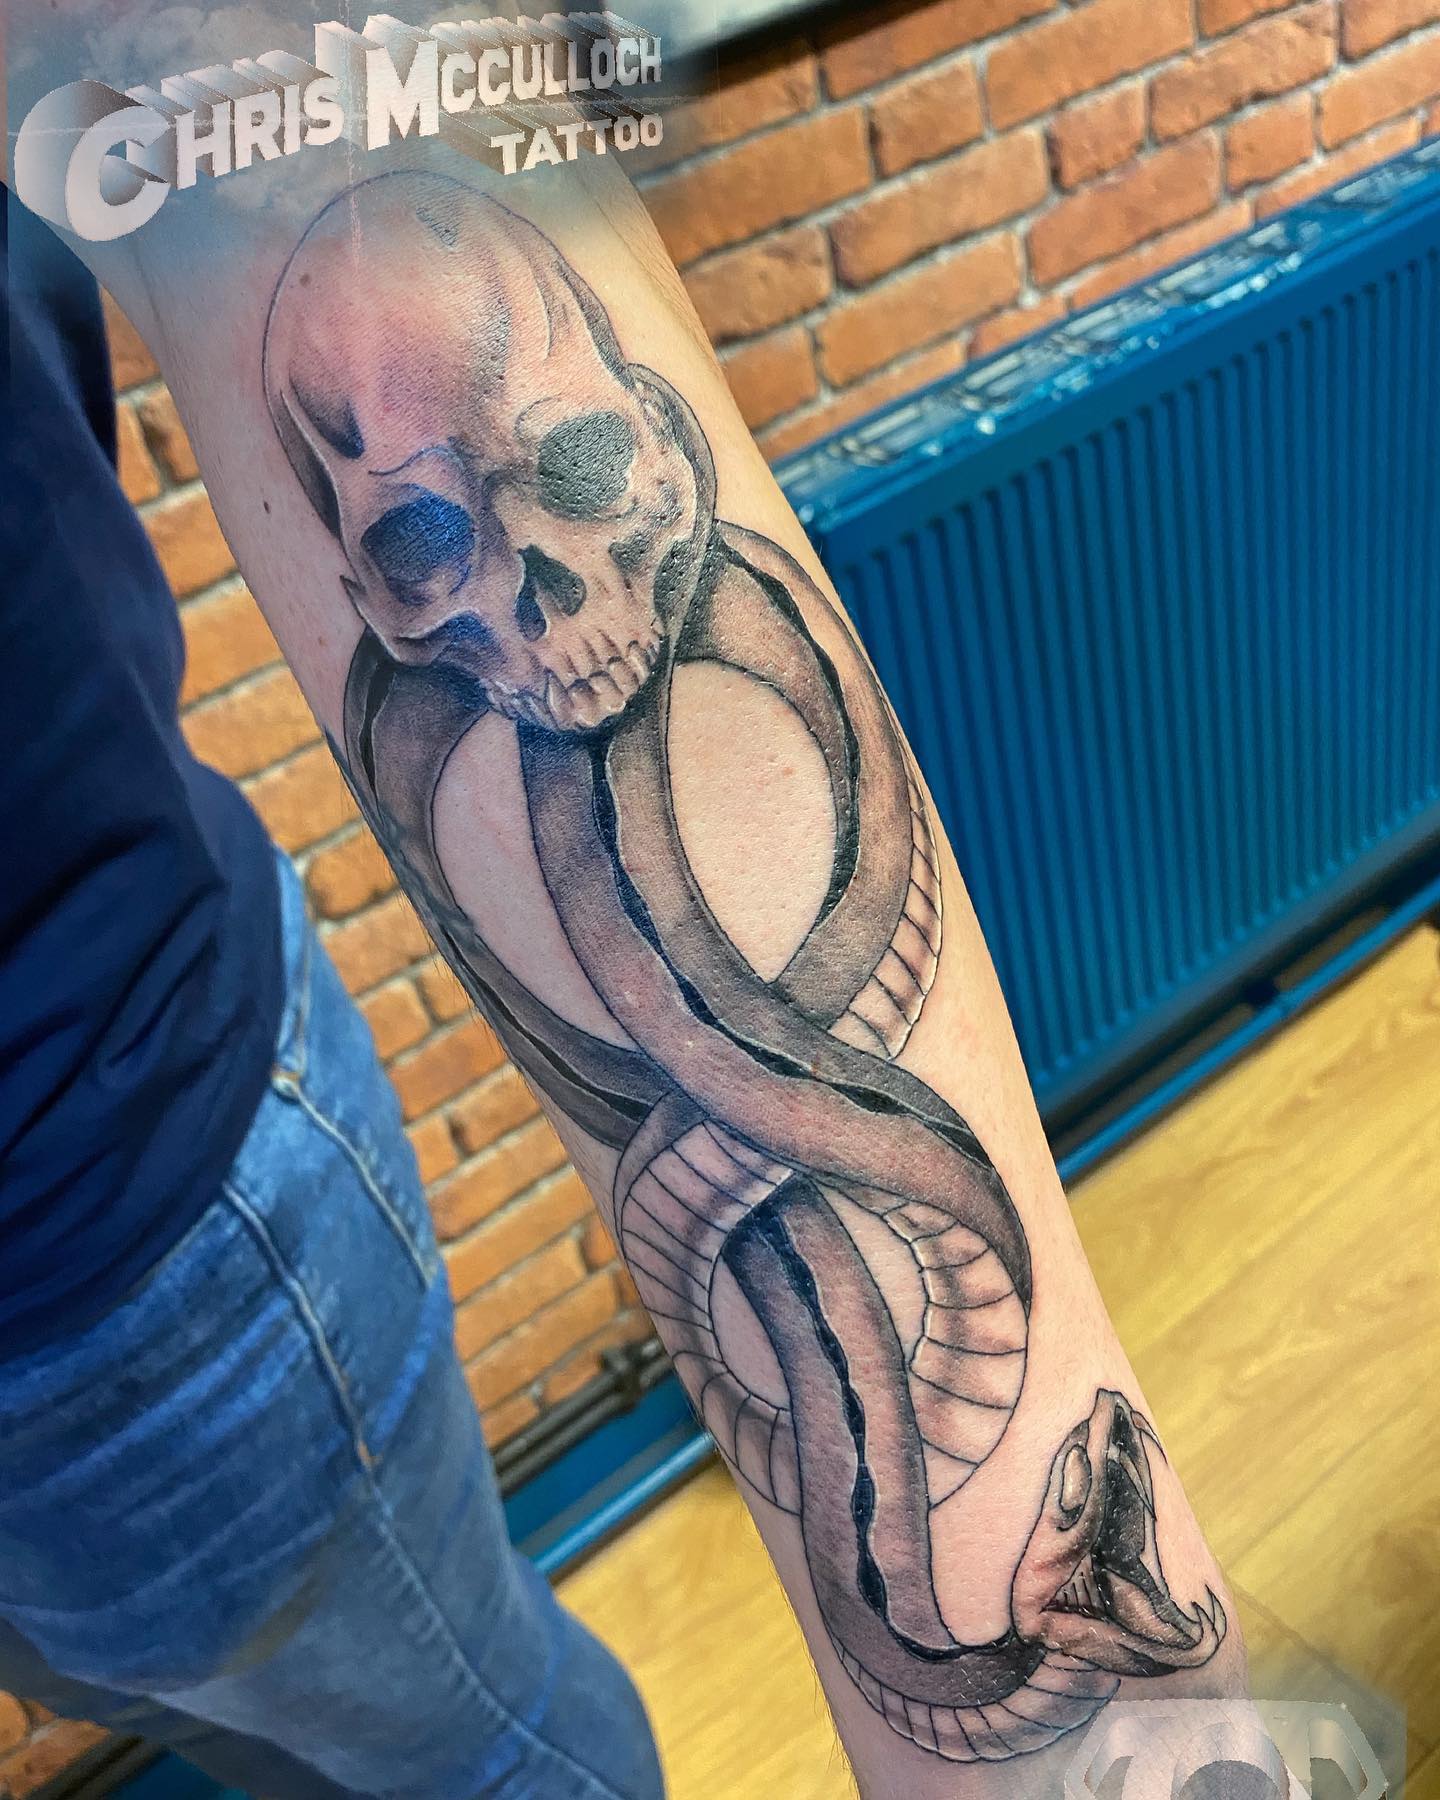 Blackwork death eater tattoo is a great choice for those who want a tattoo that stands out. The blackwork style is characterized by a small amount of shading, which makes the tattoo look bold and dramatic.